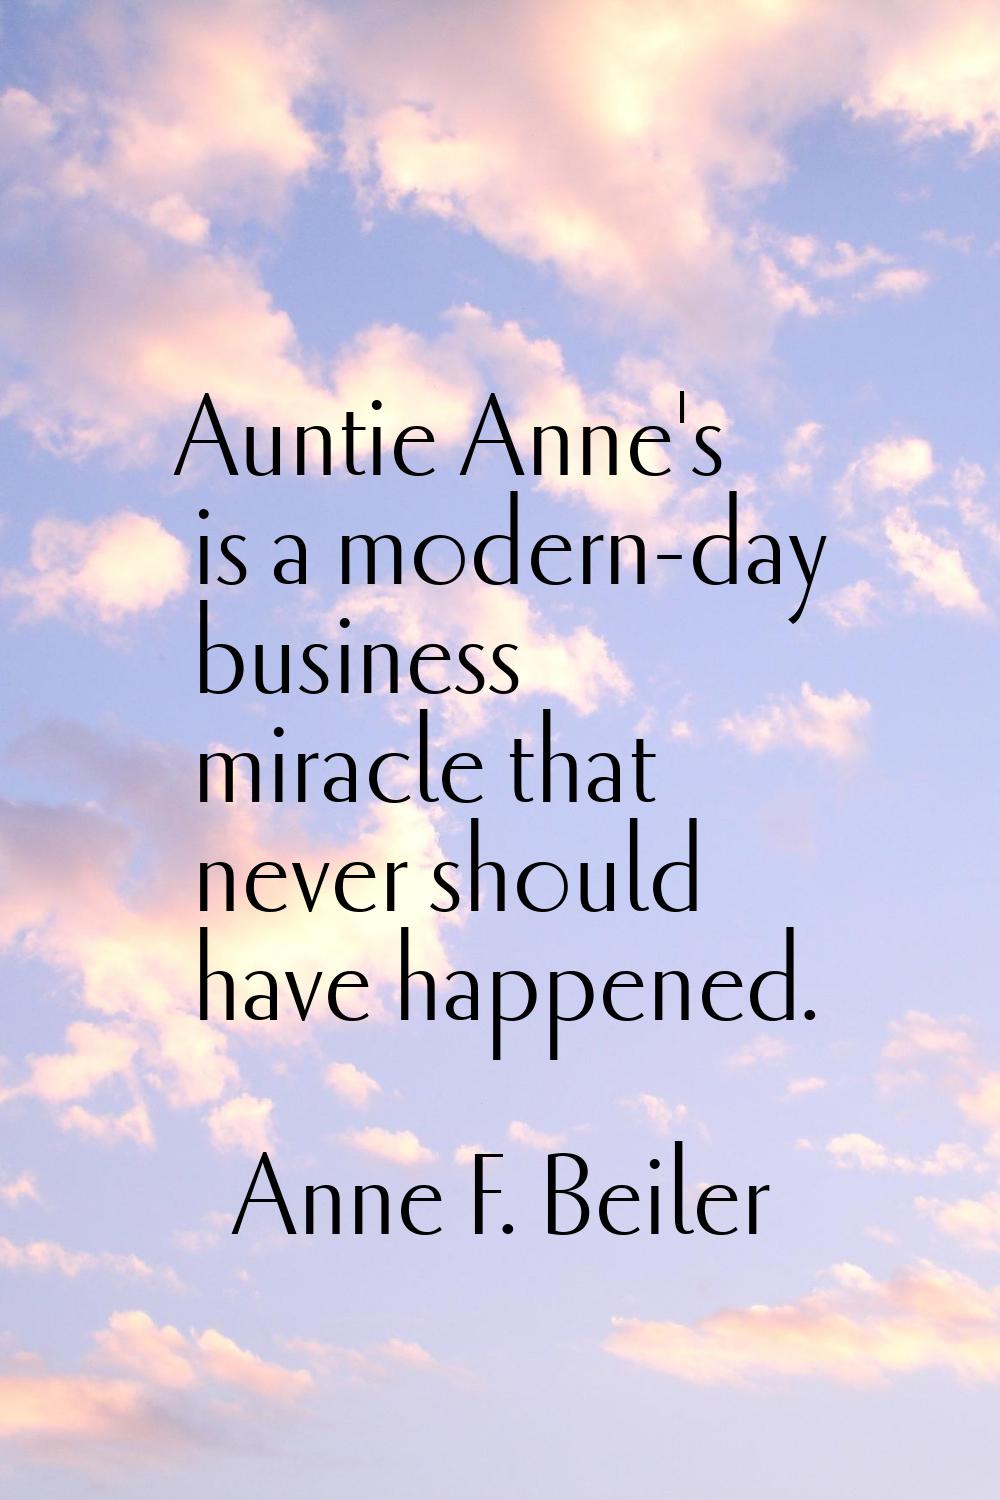 Auntie Anne's is a modern-day business miracle that never should have happened.